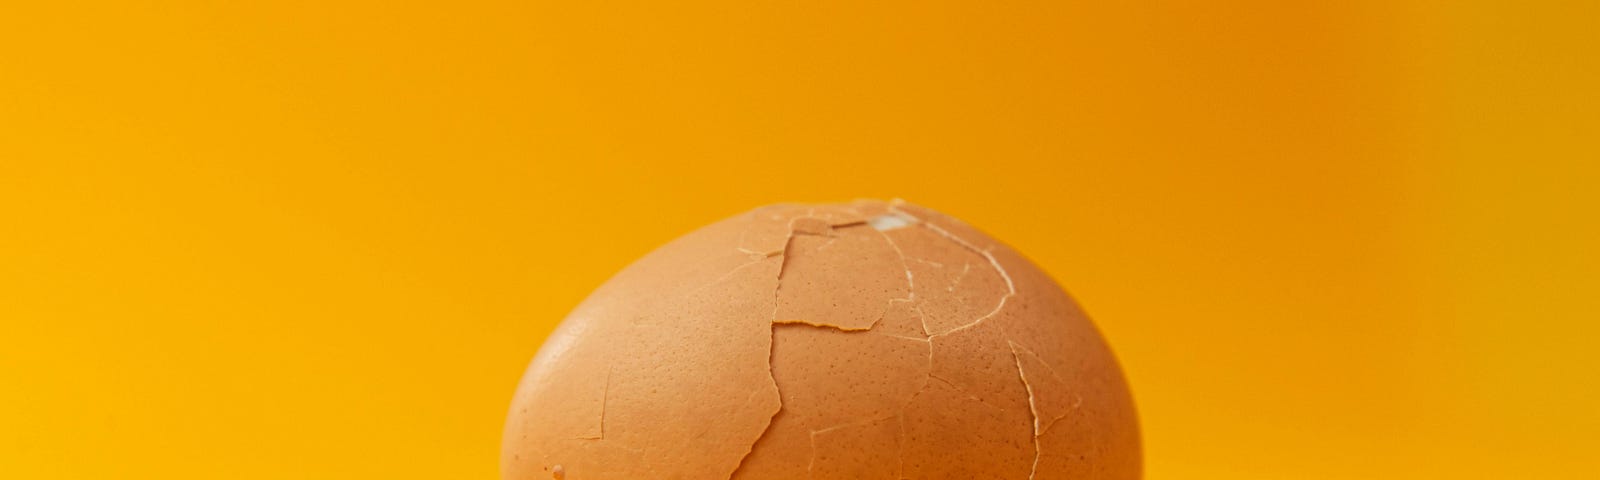 a cracked brown egg against a yellow background